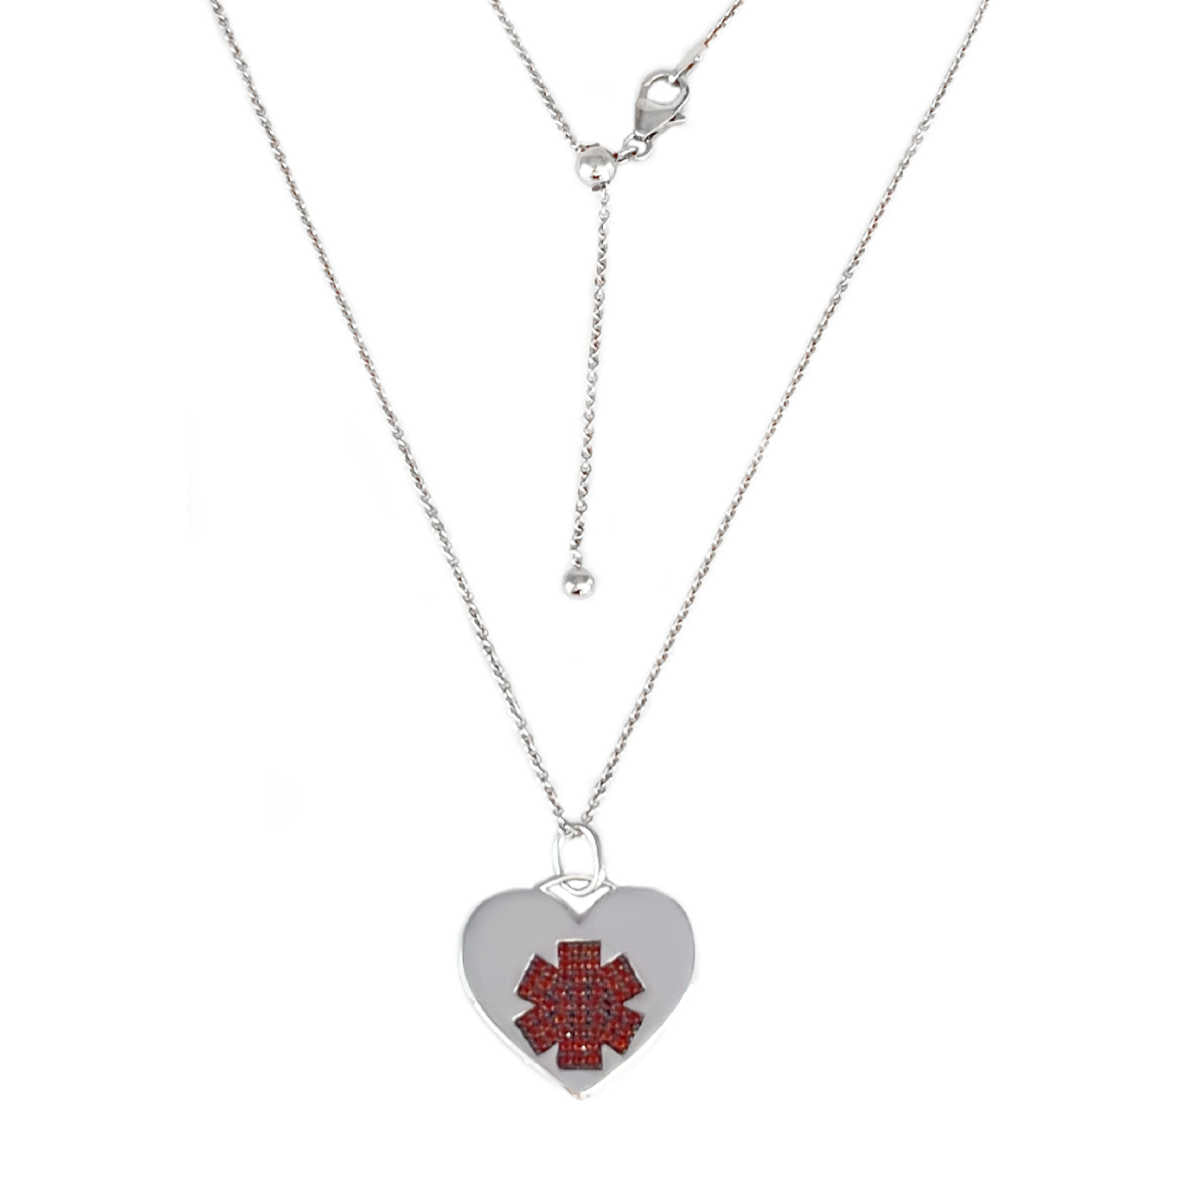 Heart Shaped Medical Alert Necklace | Sterling Silver Medical ID Necklace Charm for Women | Pretty Medical Alert Bracelets from Charmed Medical Jewelry